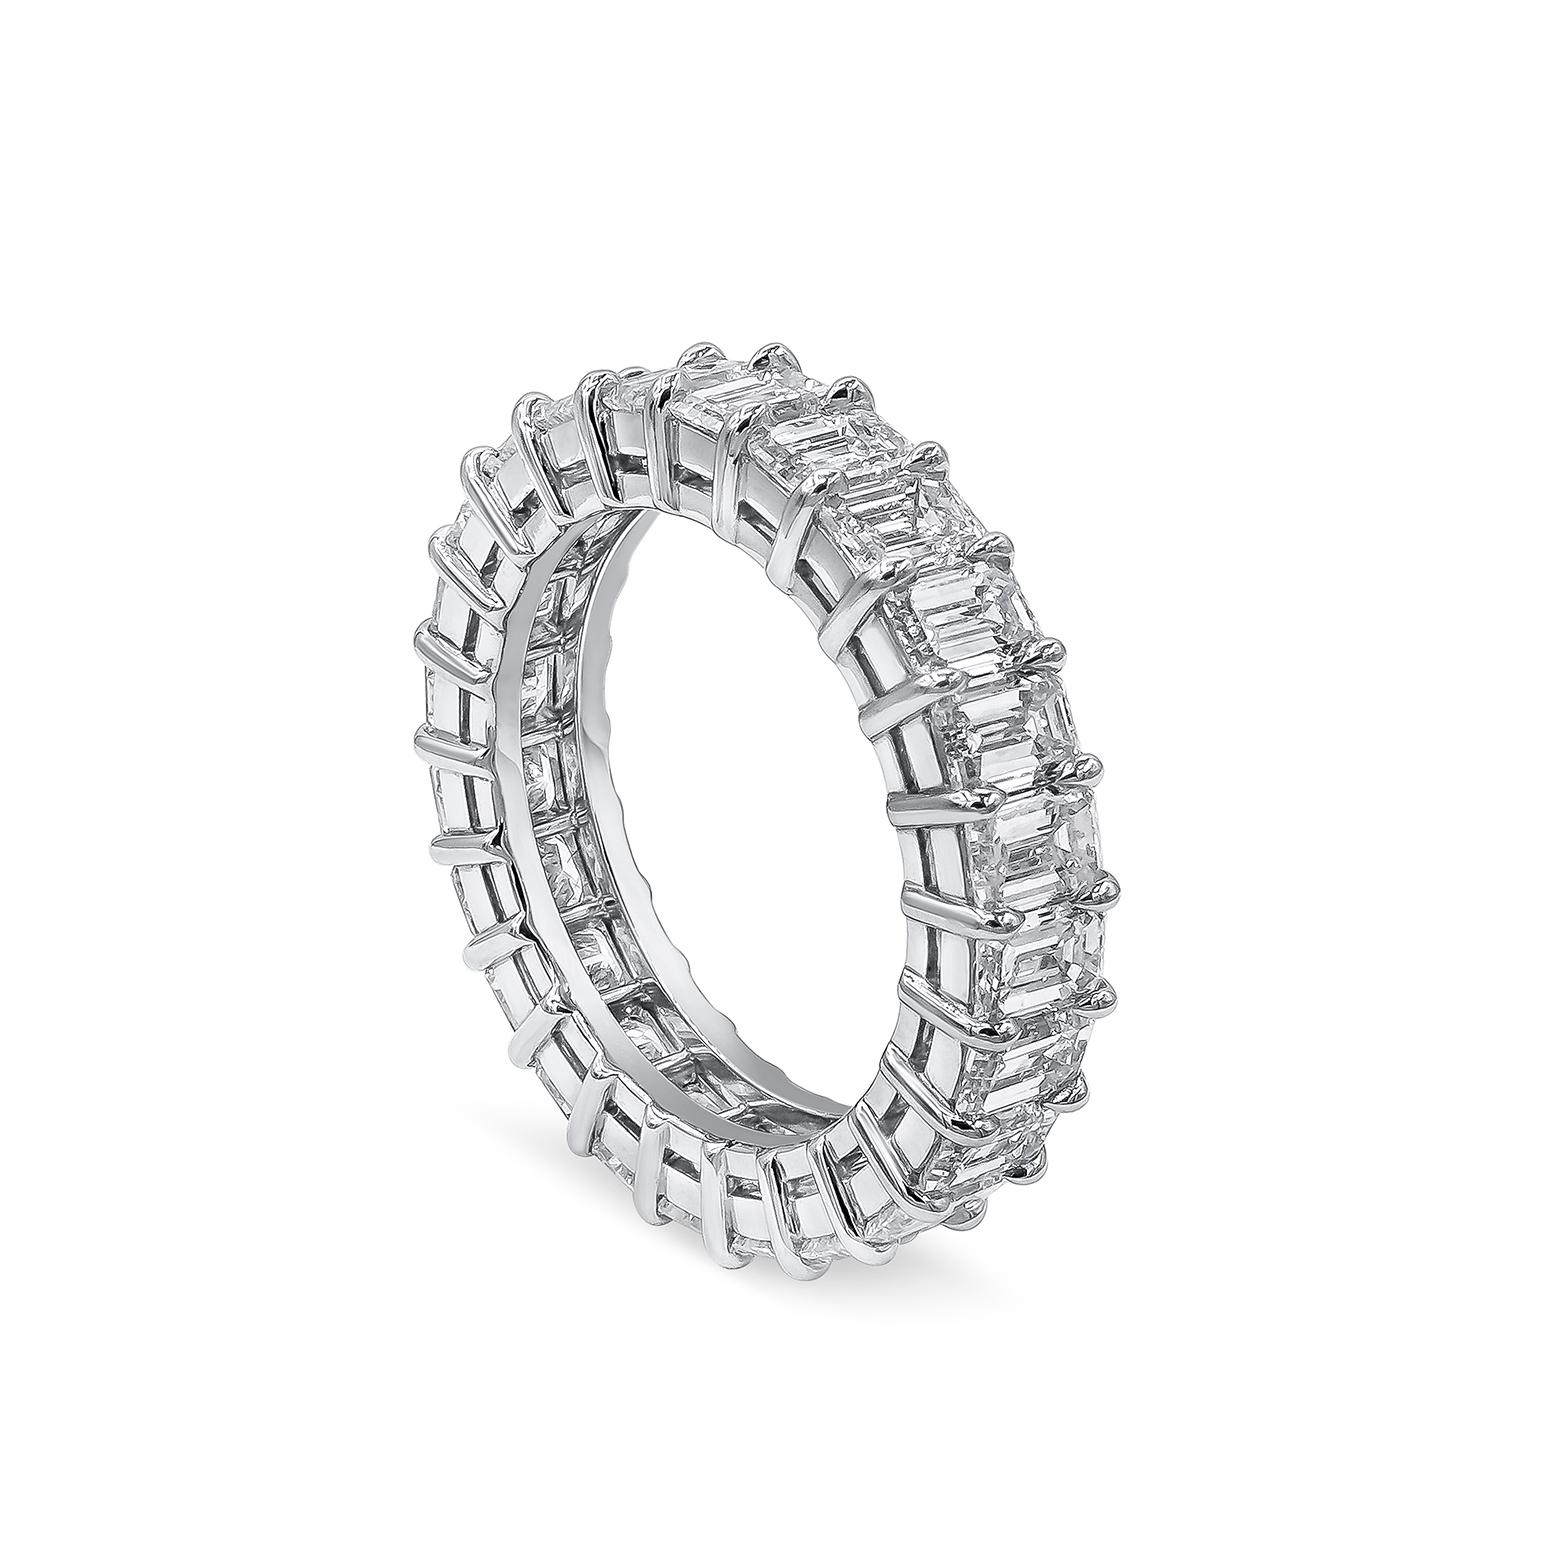 A sophisticated eternity wedding band with emerald cut diamonds weighing 4.58 carats total, set in an open gallery platinum mounting. The diamonds are approximately D-F color and VS clarity. Size 5.5 US.

Roman Malakov is a custom house,